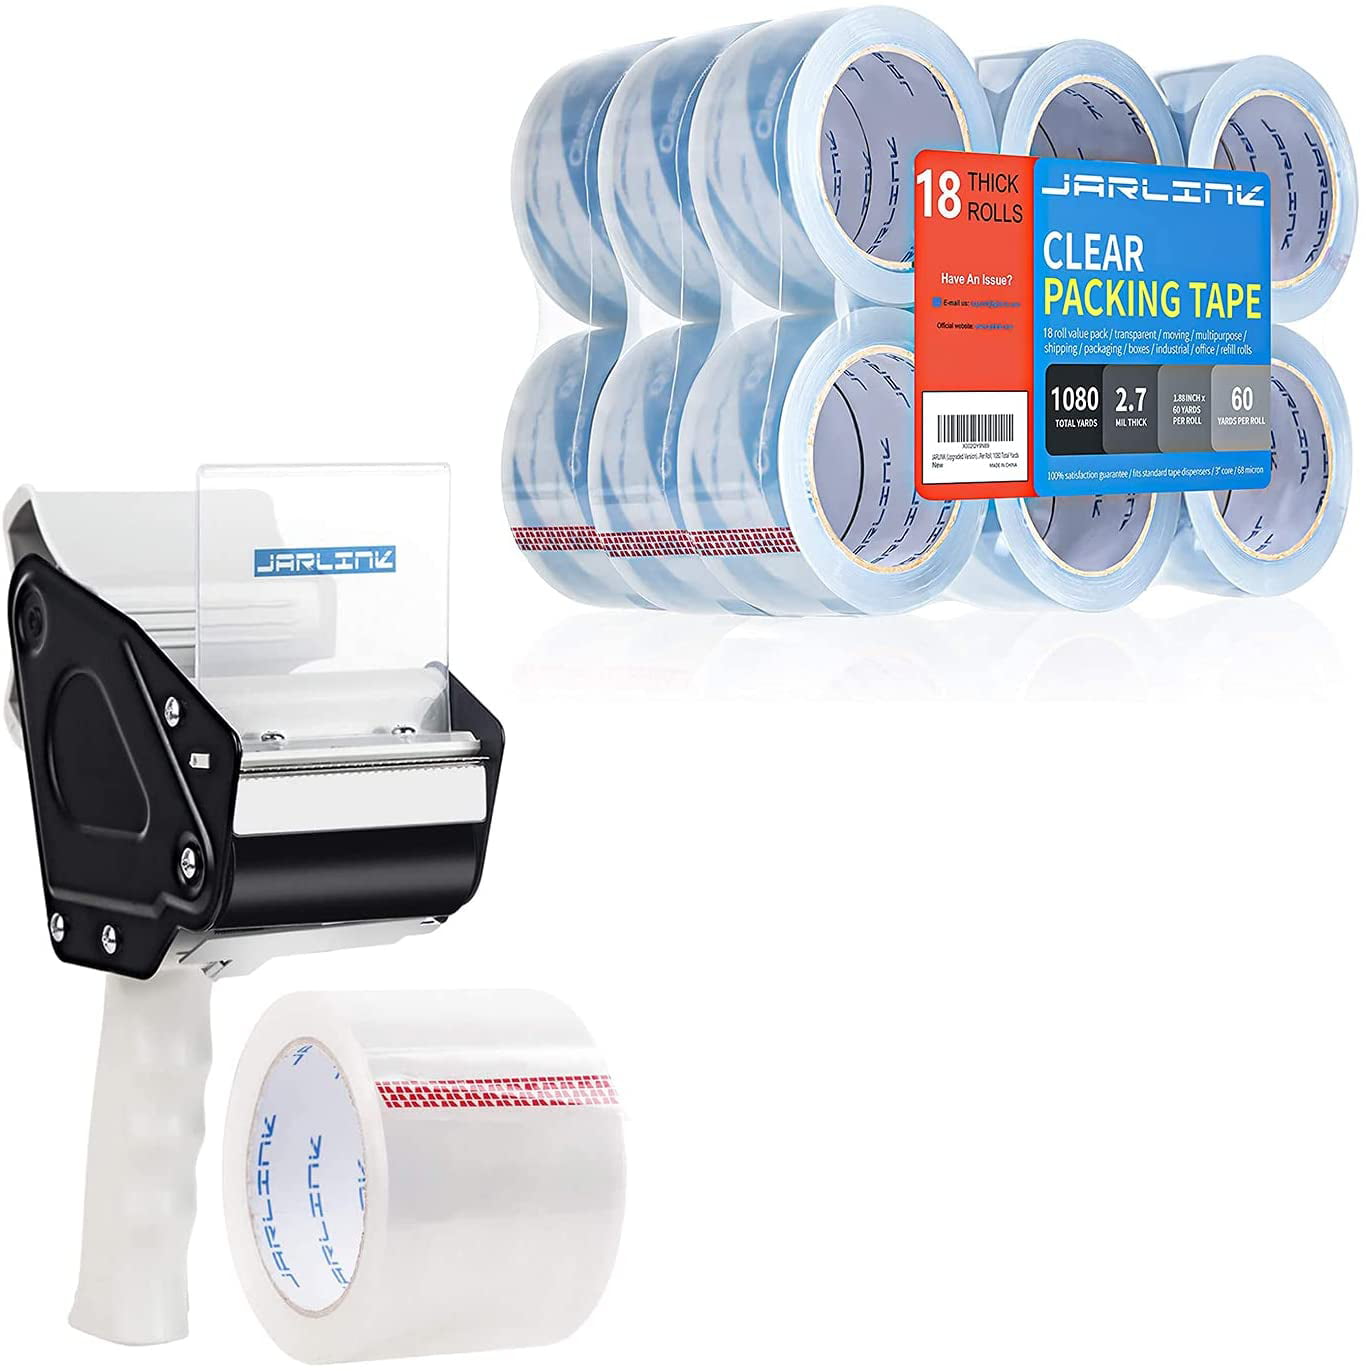 JARLINK 2 Dispenser Guns with 2 Rolls Tape Bundle with Clear Packing Tape for Shipping Packaging Moving Sealing 18 Rolls 